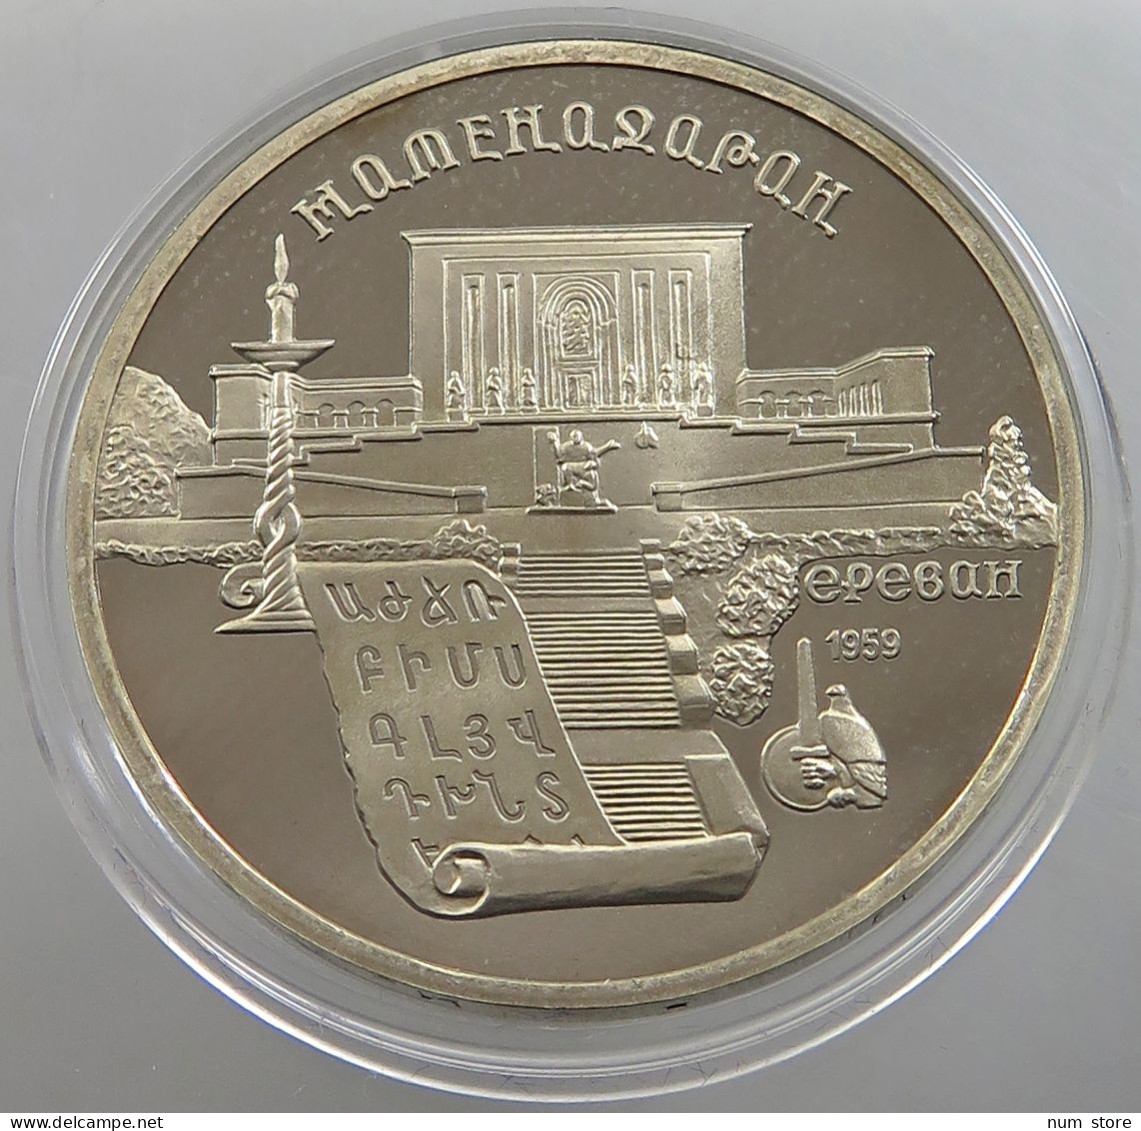 RUSSIA USSR 5 ROUBLES 1990 PROOF #sm14 0401 - Russland